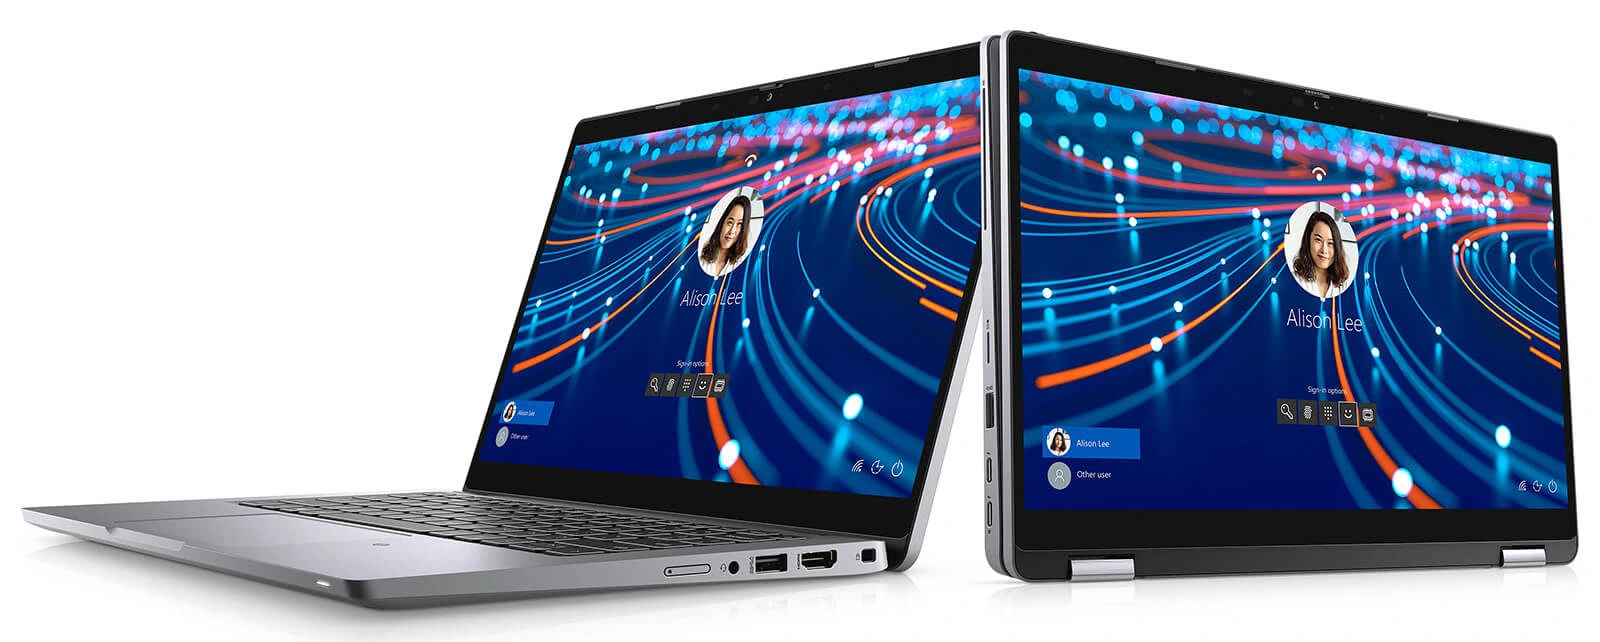 Dell Latitude 5320 (2021) Features 05